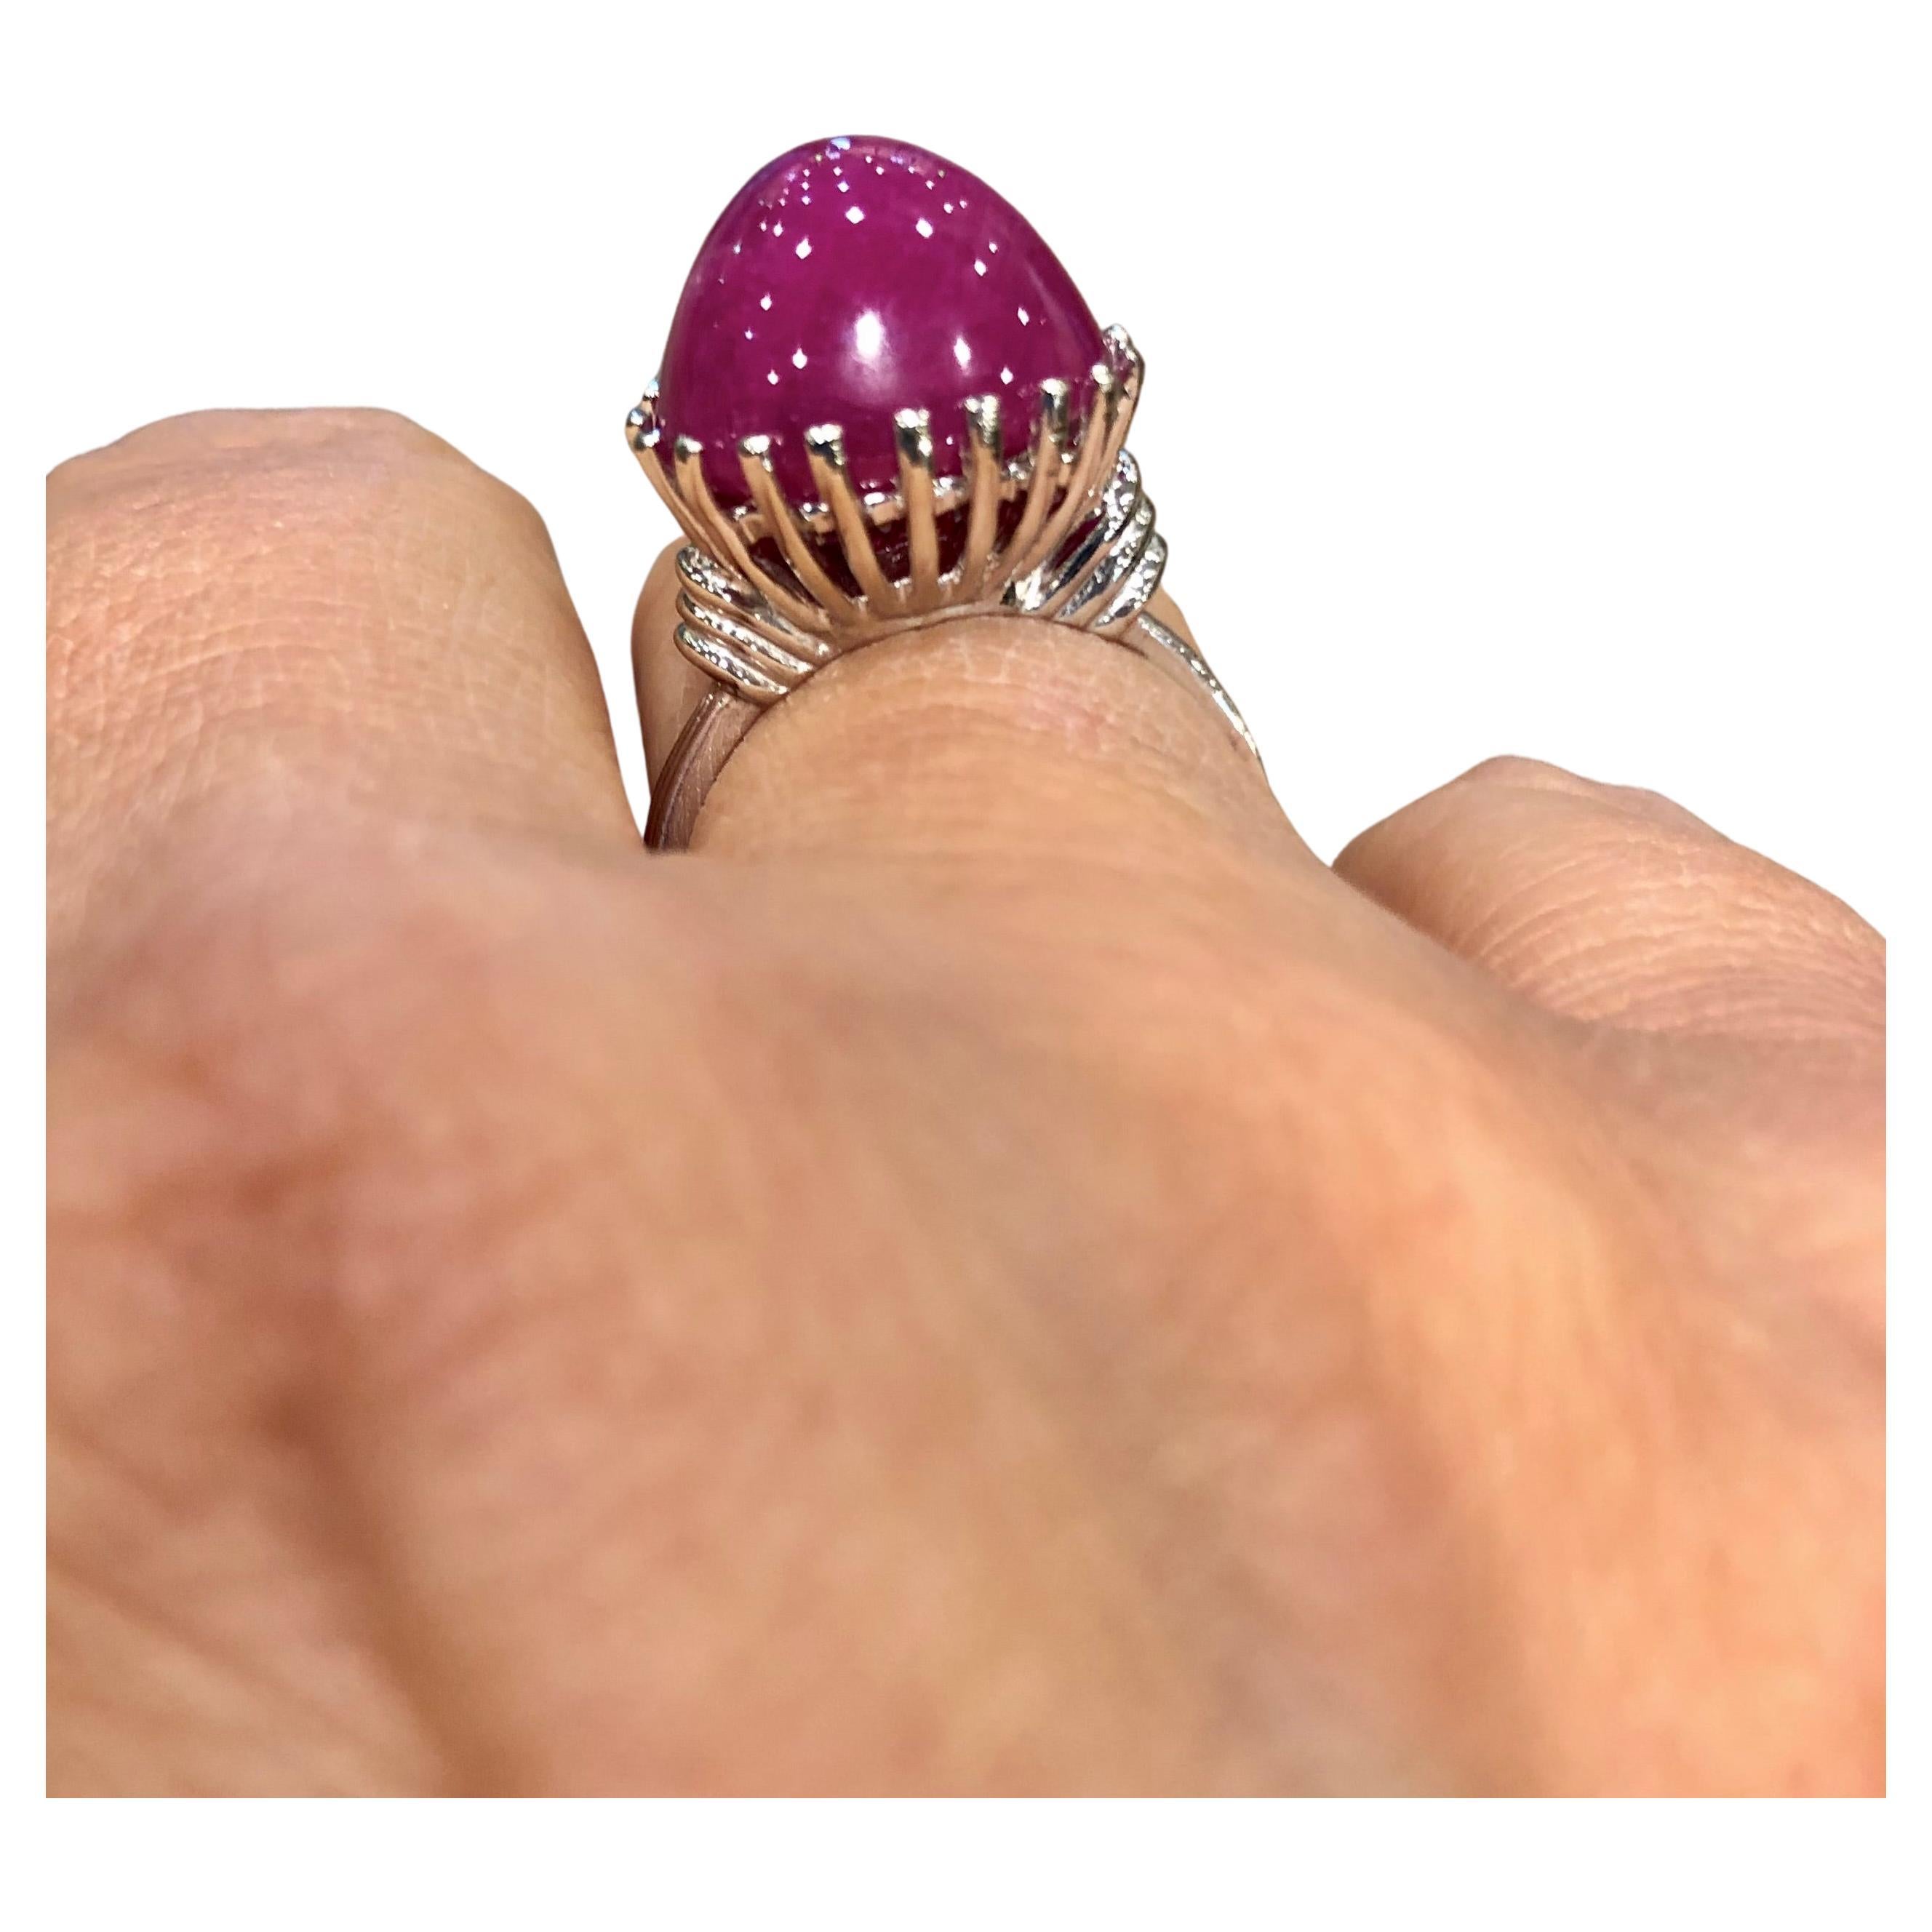 Stunning Statement Solitaire Cathedral Style Ring
Centering a 13.91 carats Burma Ruby sugarlof cabochon pinkish-red color.
Statement ring cabochon Burmese ruby crafted in white gold 14k. Size 7 